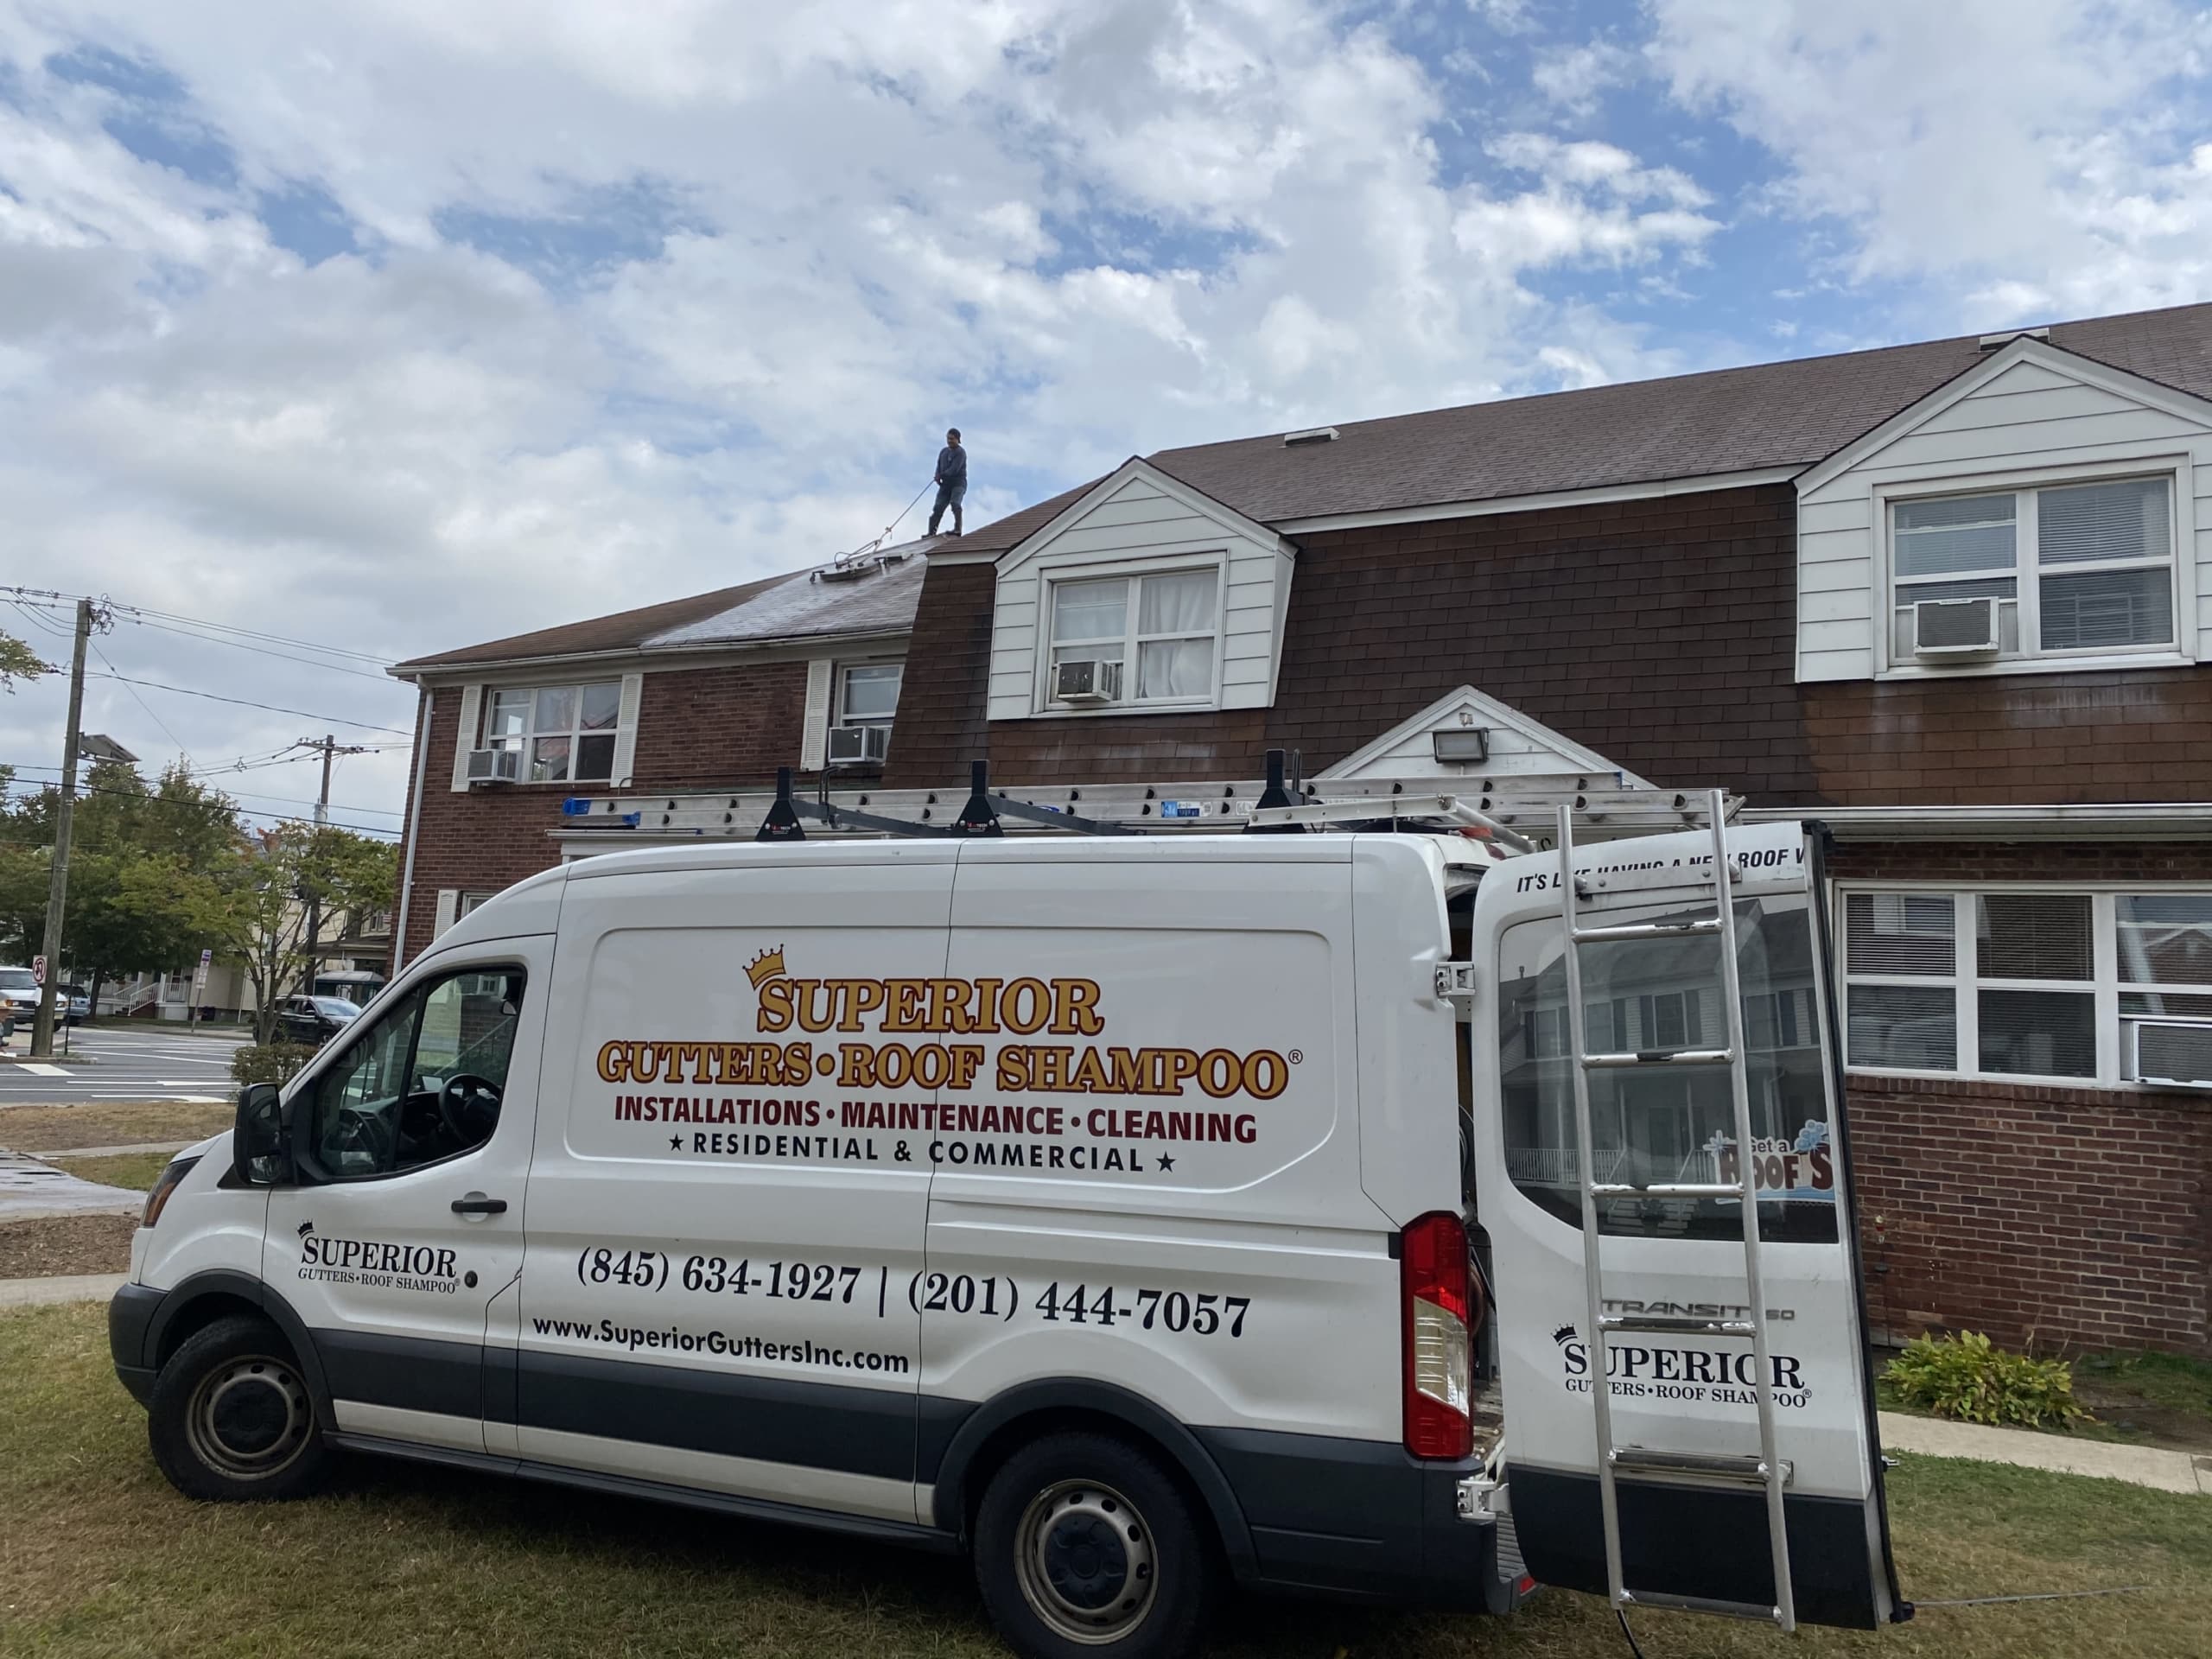 roof cleaning of apartment complex in bergen county nj by superior seamless gutters